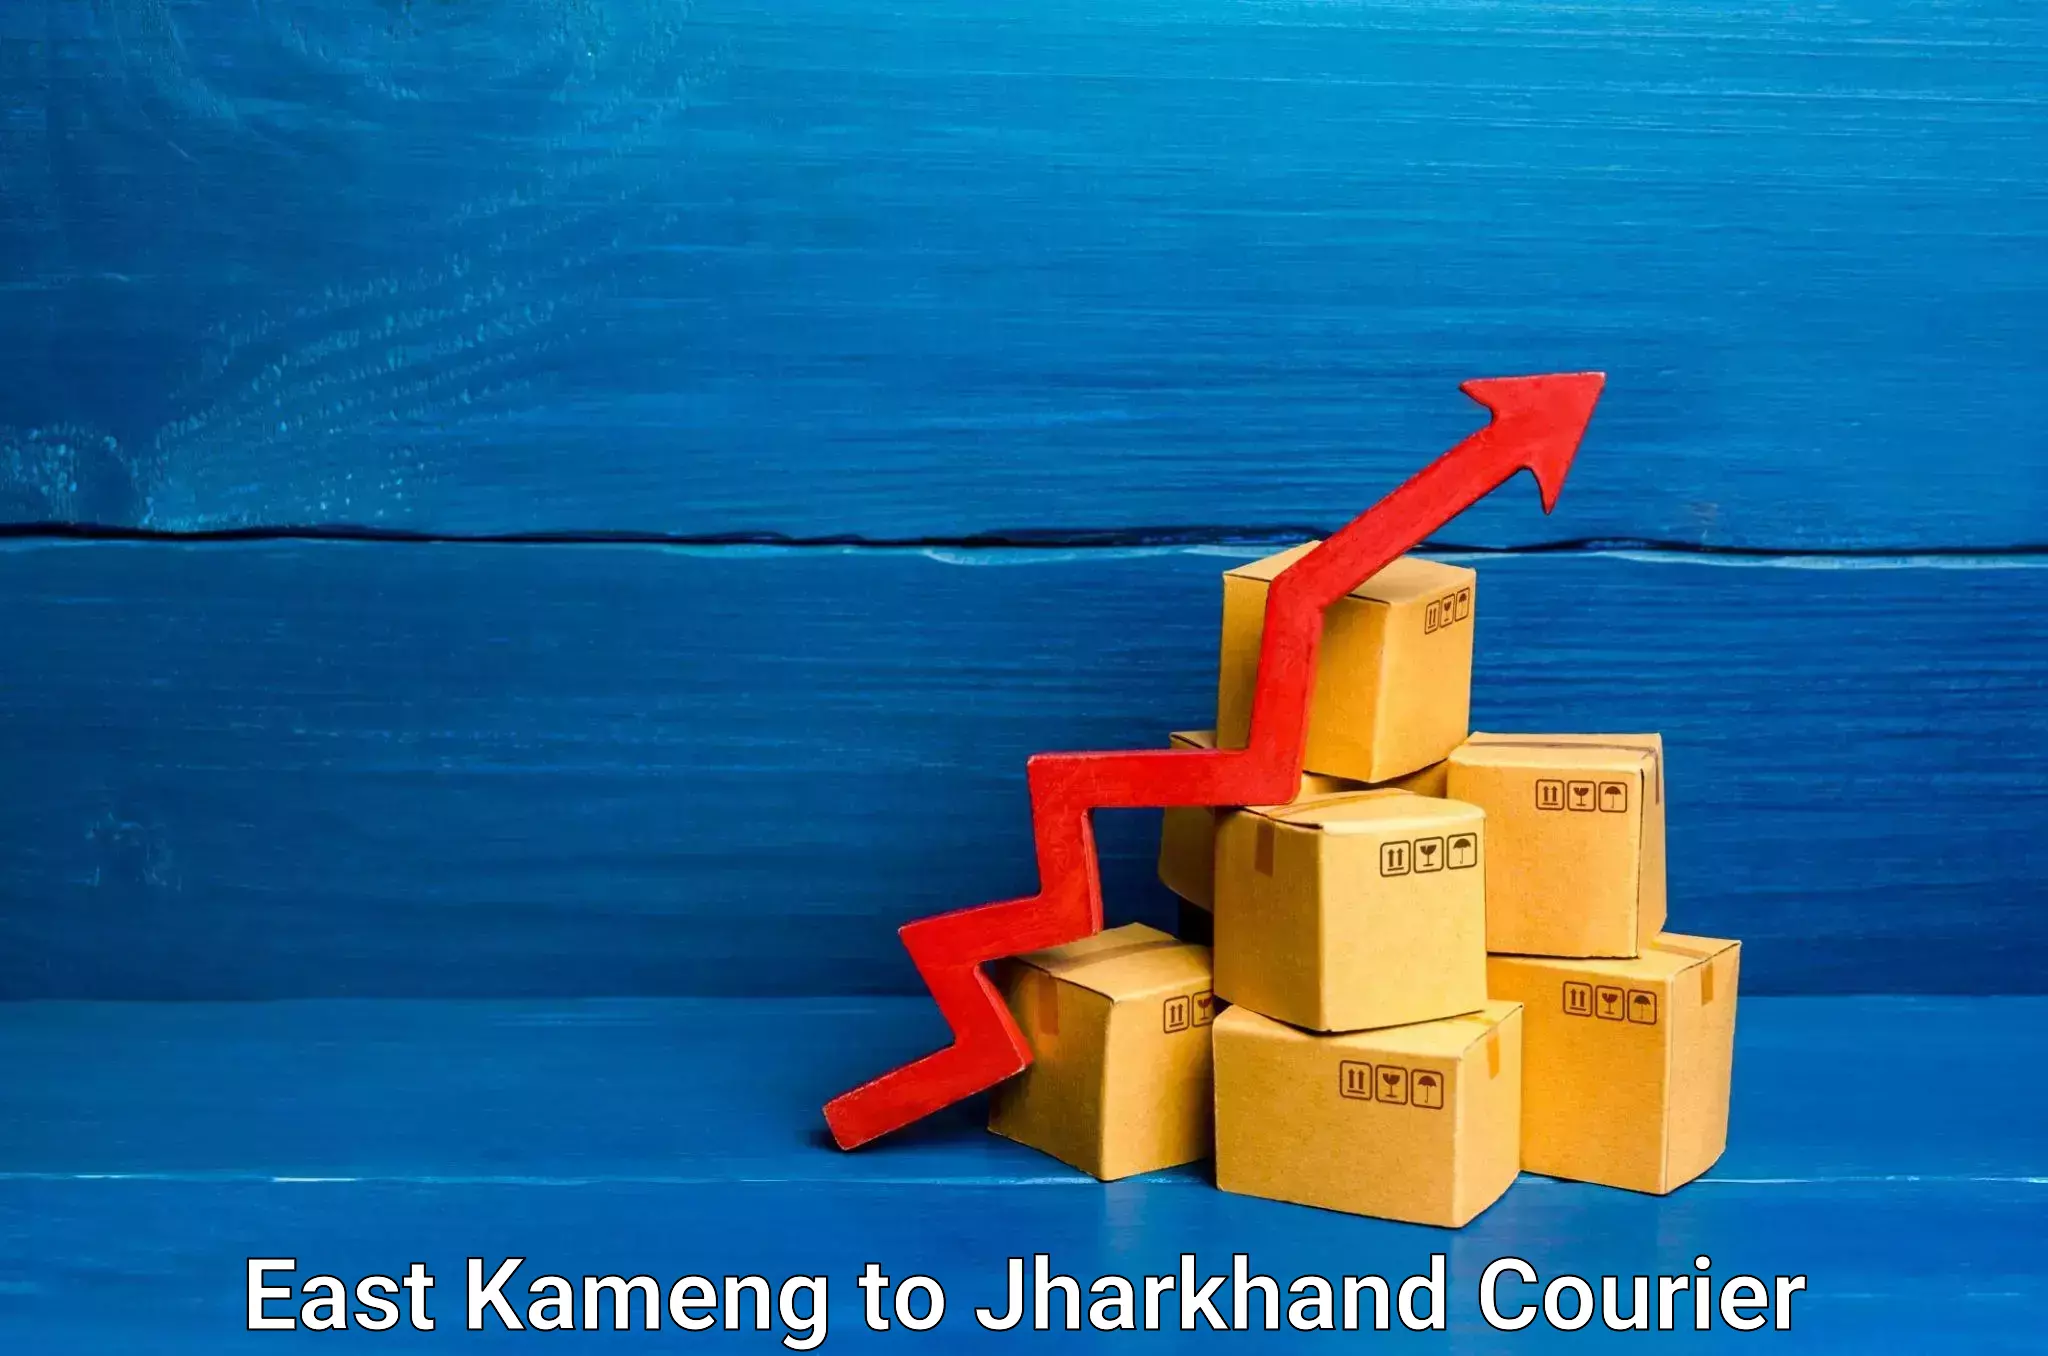 Reliable package handling in East Kameng to Jharkhand